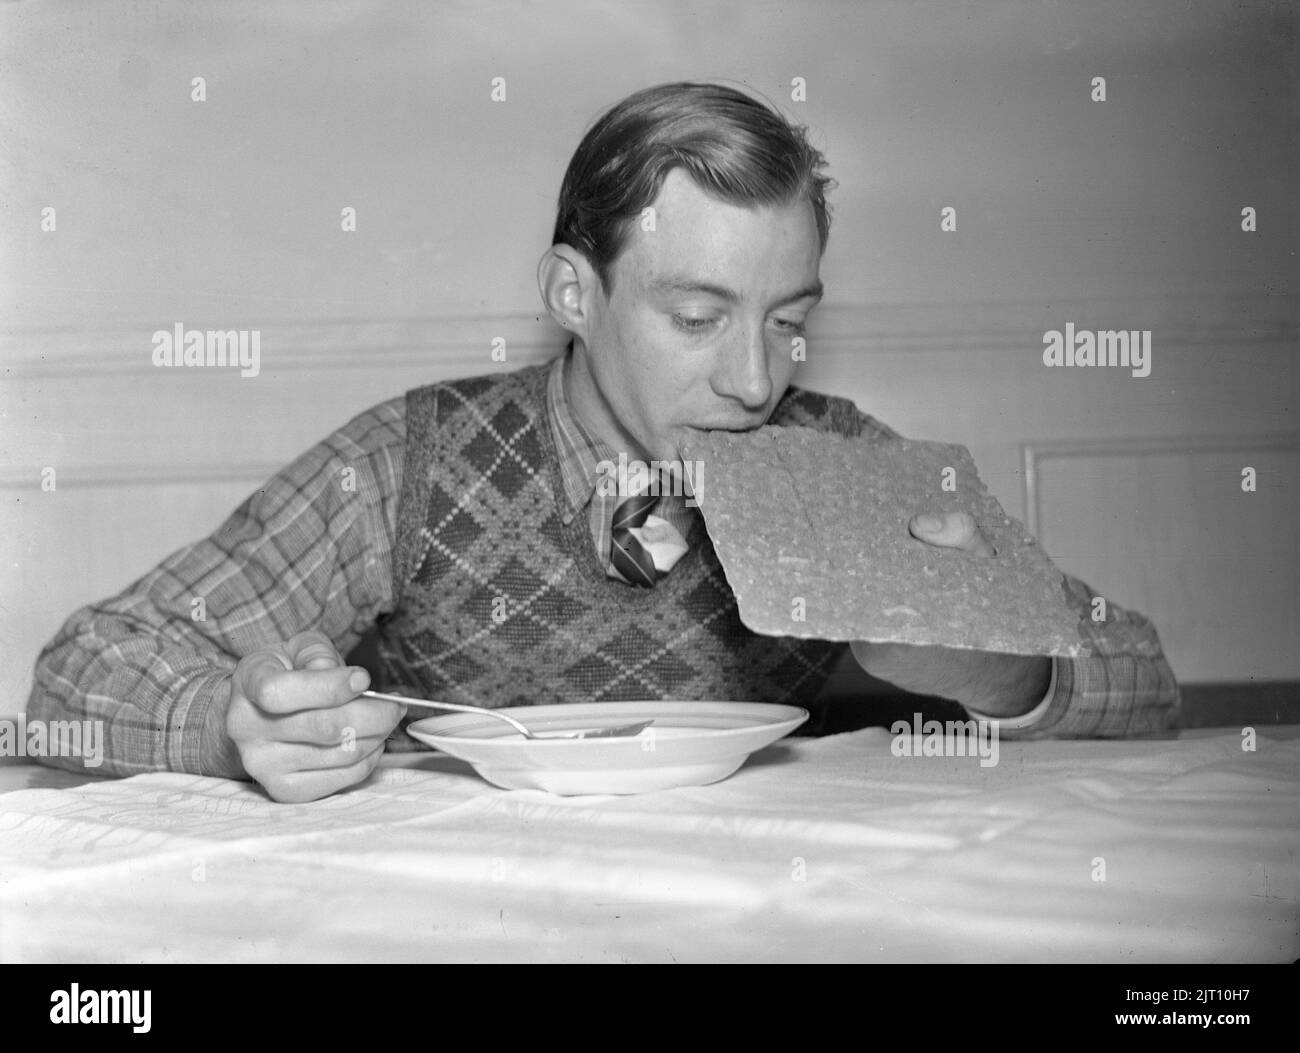 1940s meal. A young man, athlete Erik Pettersson at the food table taking a bite from the bread. He holds it like a painters palette with his thumb visible in a hole of the bread, perhaps he found the perfect way of holding it this way. Sweden 1940 Kristoffersson Ref 75-1 Stock Photo